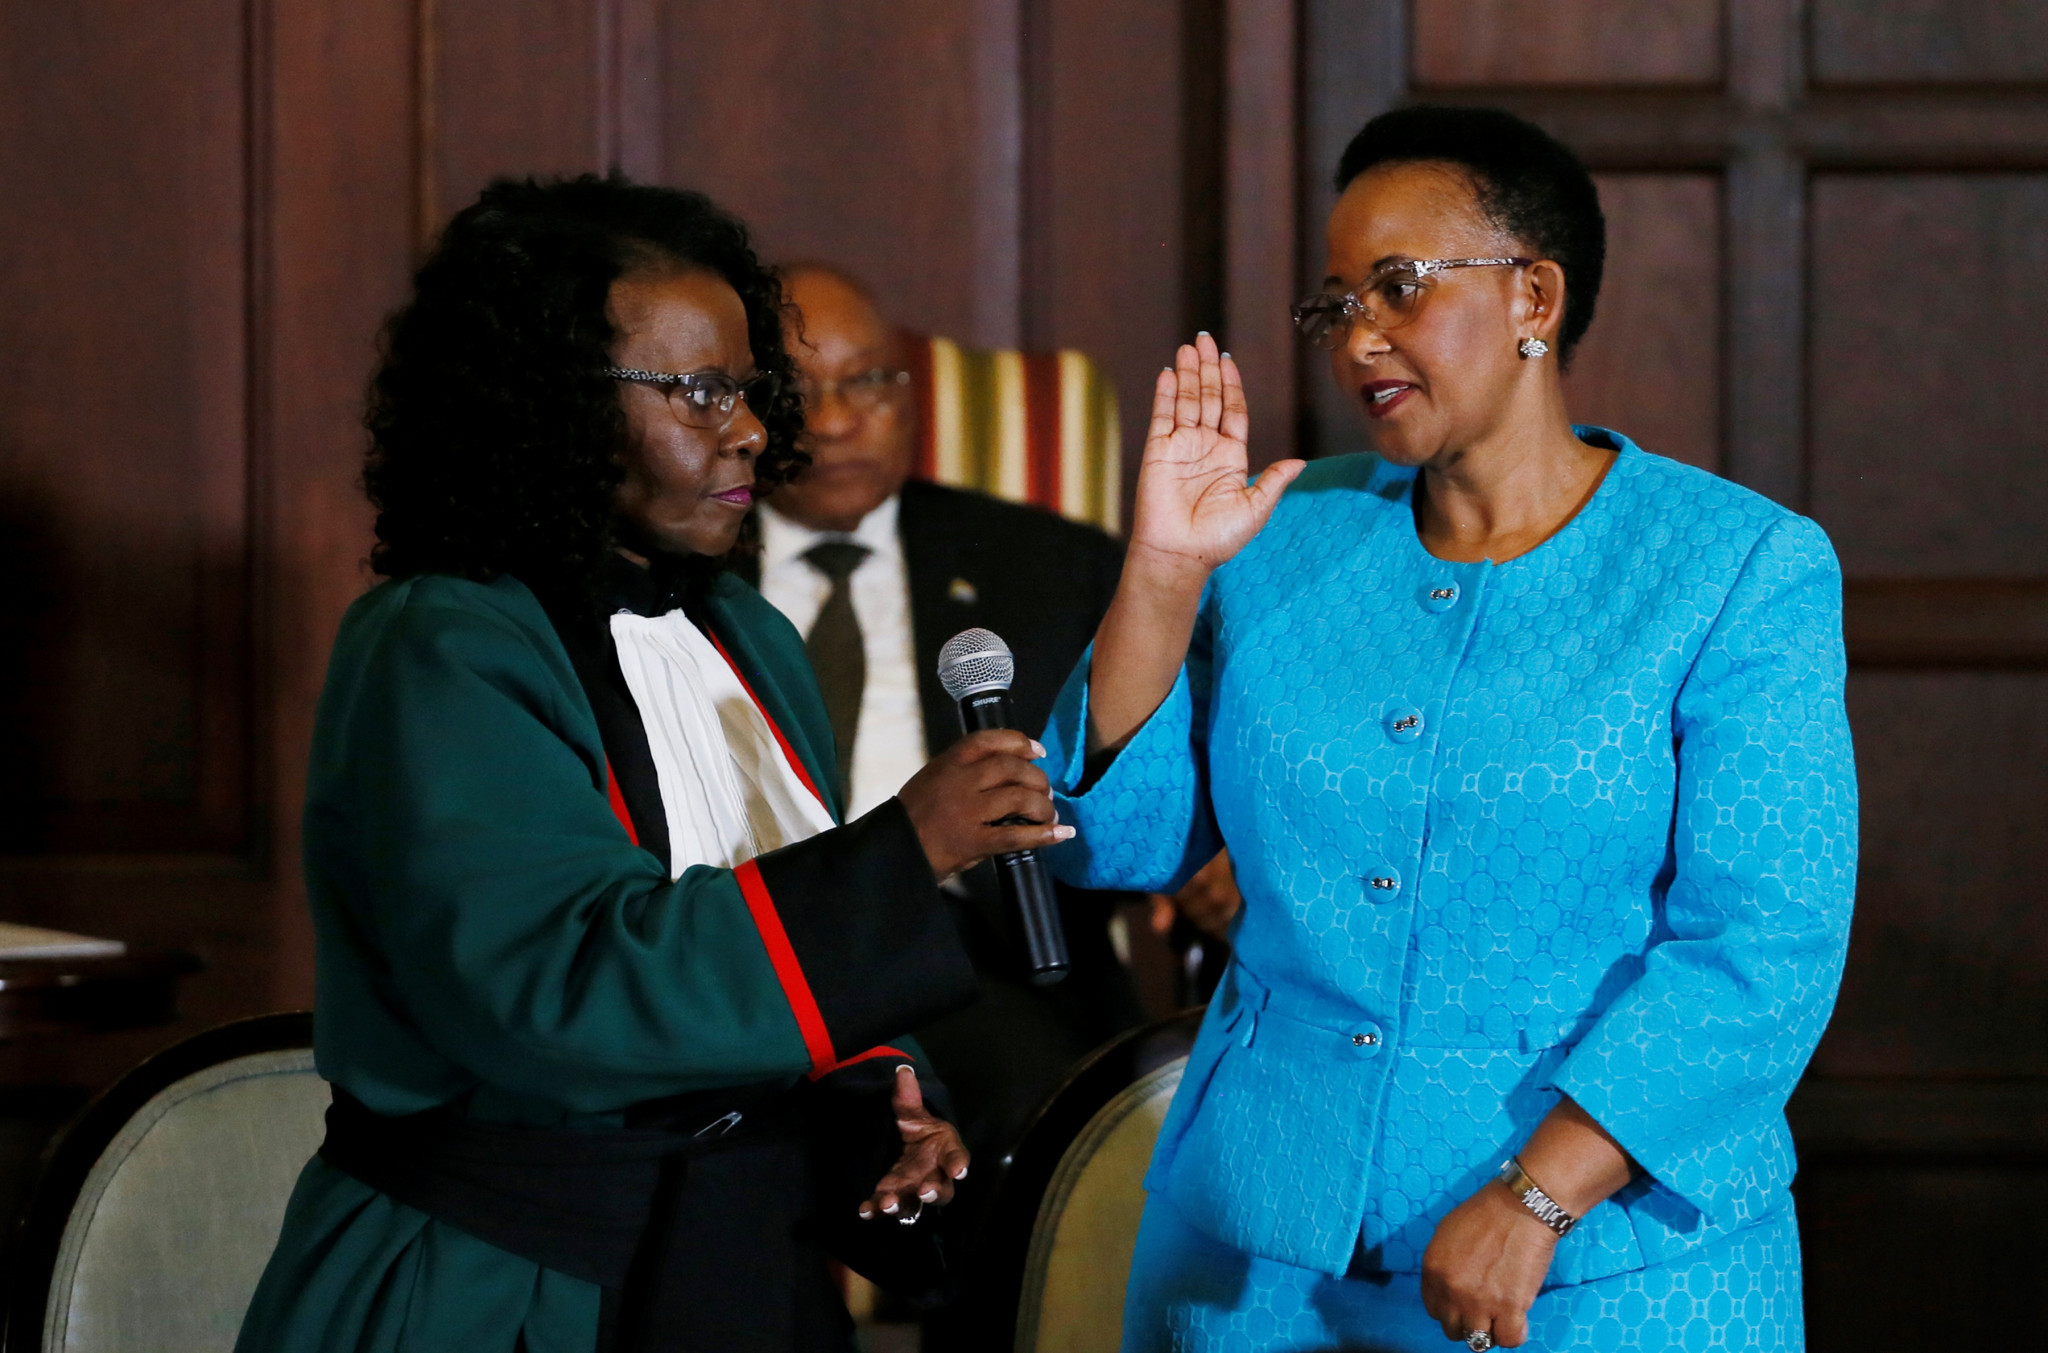 Sports Minister Tokozile Xasa has pressured the SAFA not to back Morocco's bid for the 2026 World Cup ©Getty Images back